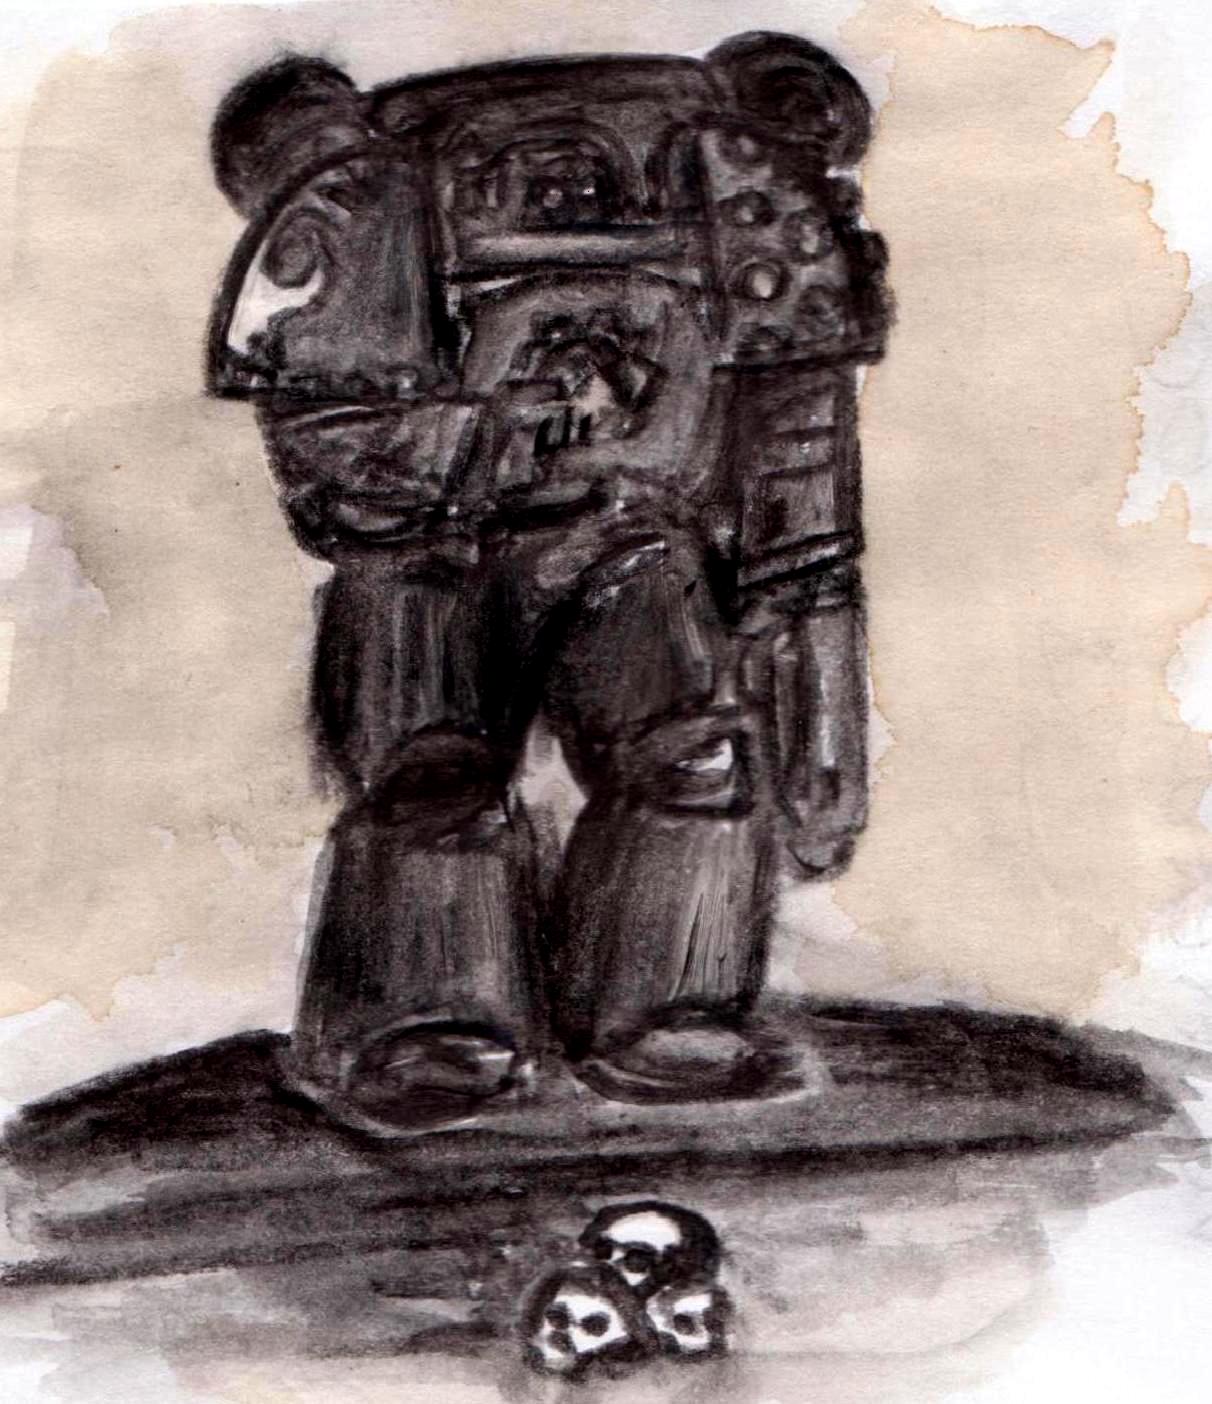 Artwork, Chaos Space Marines, Crisis Battlesuit, Cybot, Drawing, Dreadnought, Old, School, Scratch Build, Style, Tau, Work In Progress, XV8